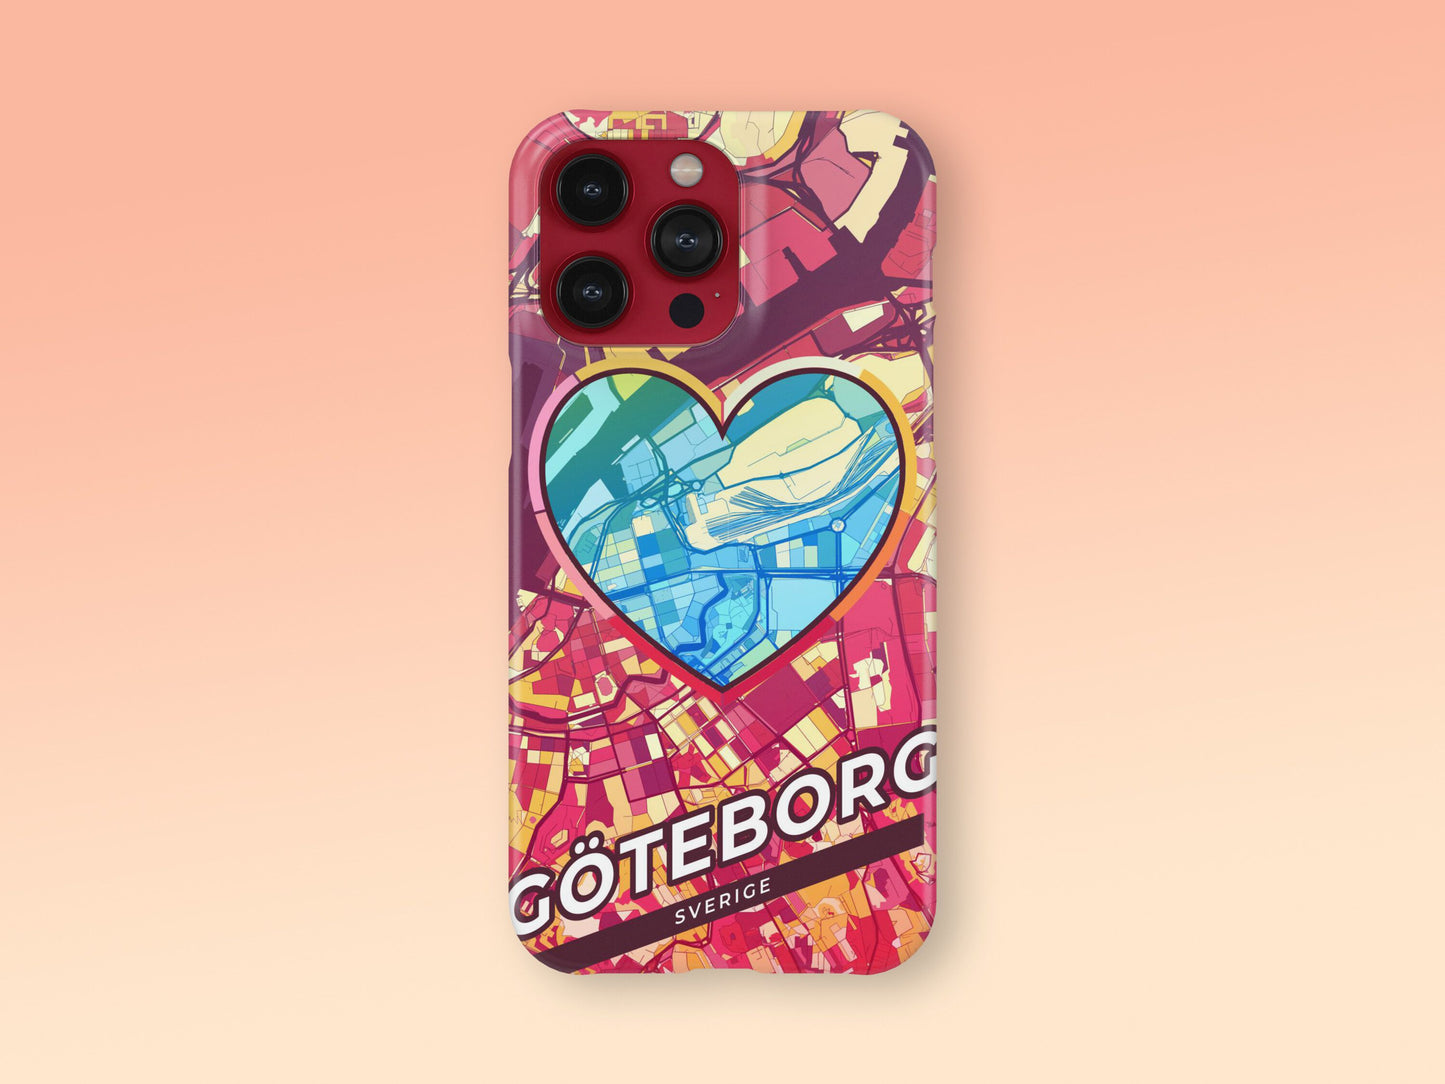 Gothenburg Sweden slim phone case with colorful icon. Birthday, wedding or housewarming gift. Couple match cases. 2